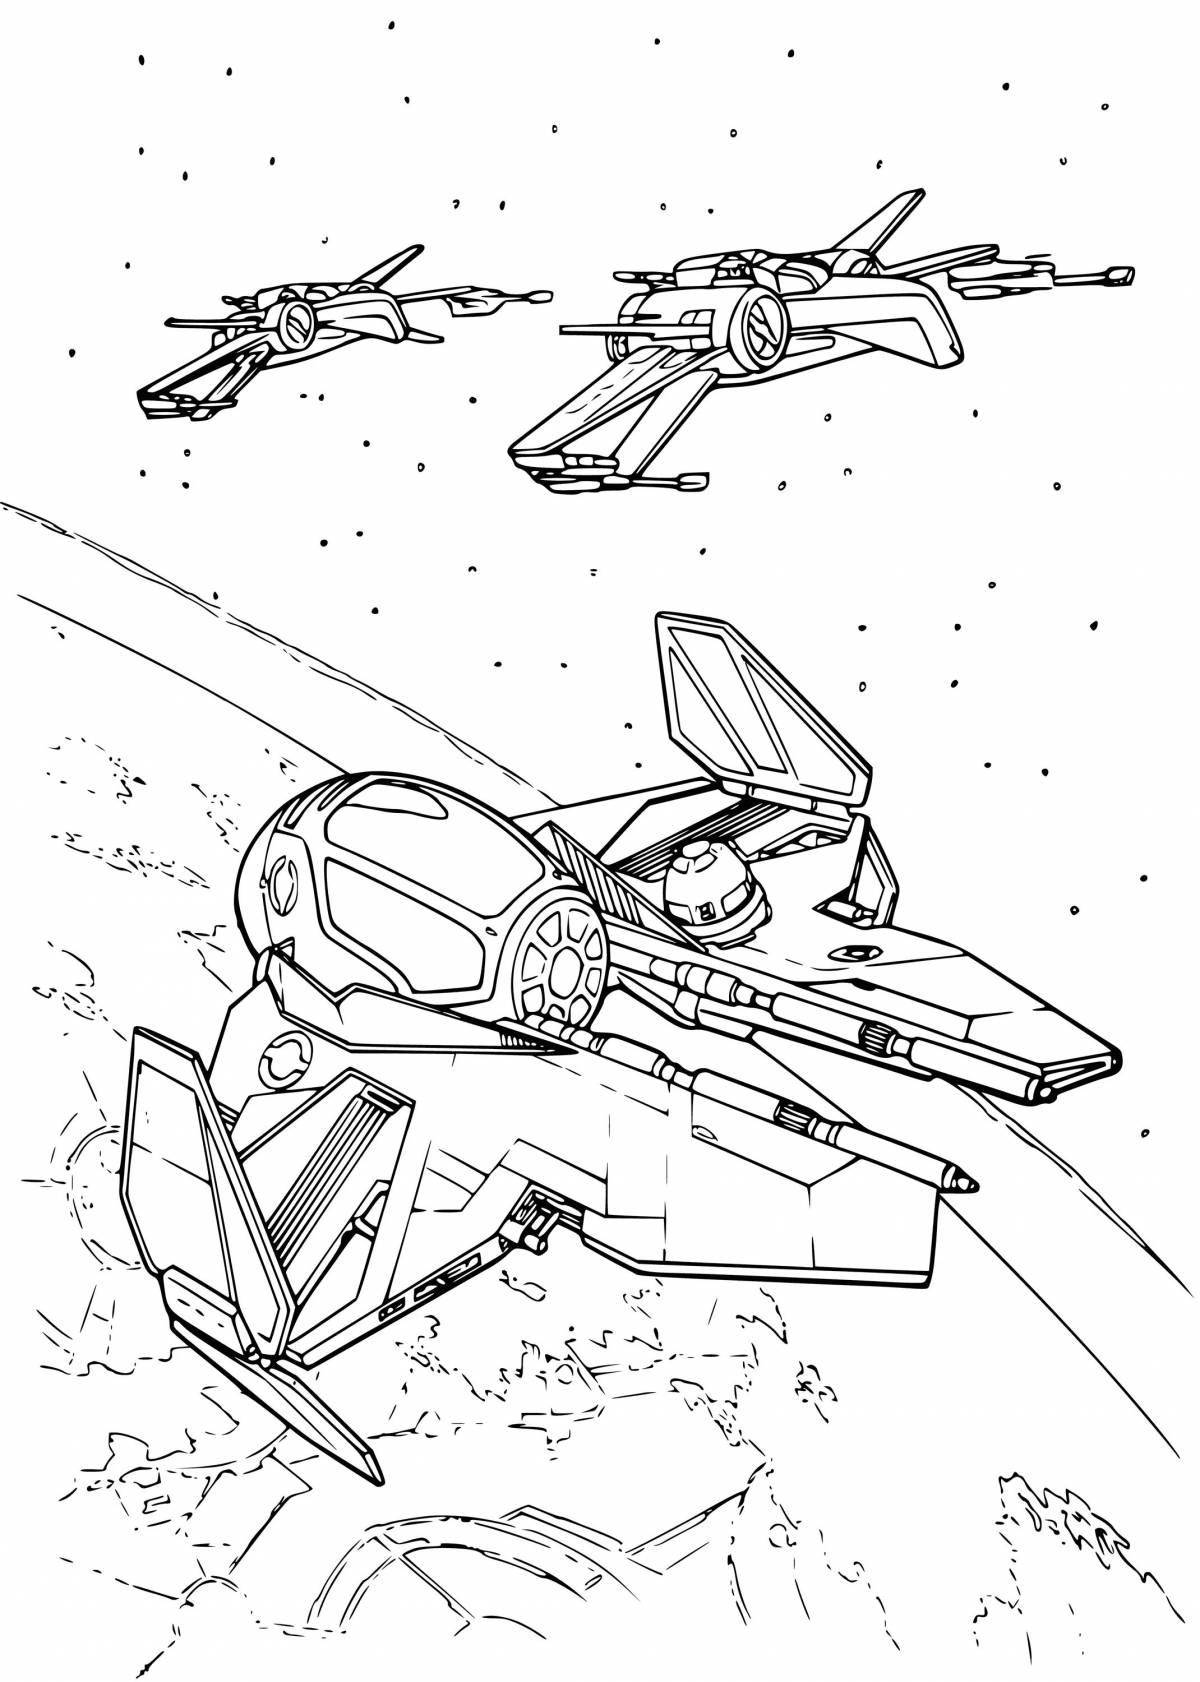 Space wars coloring page